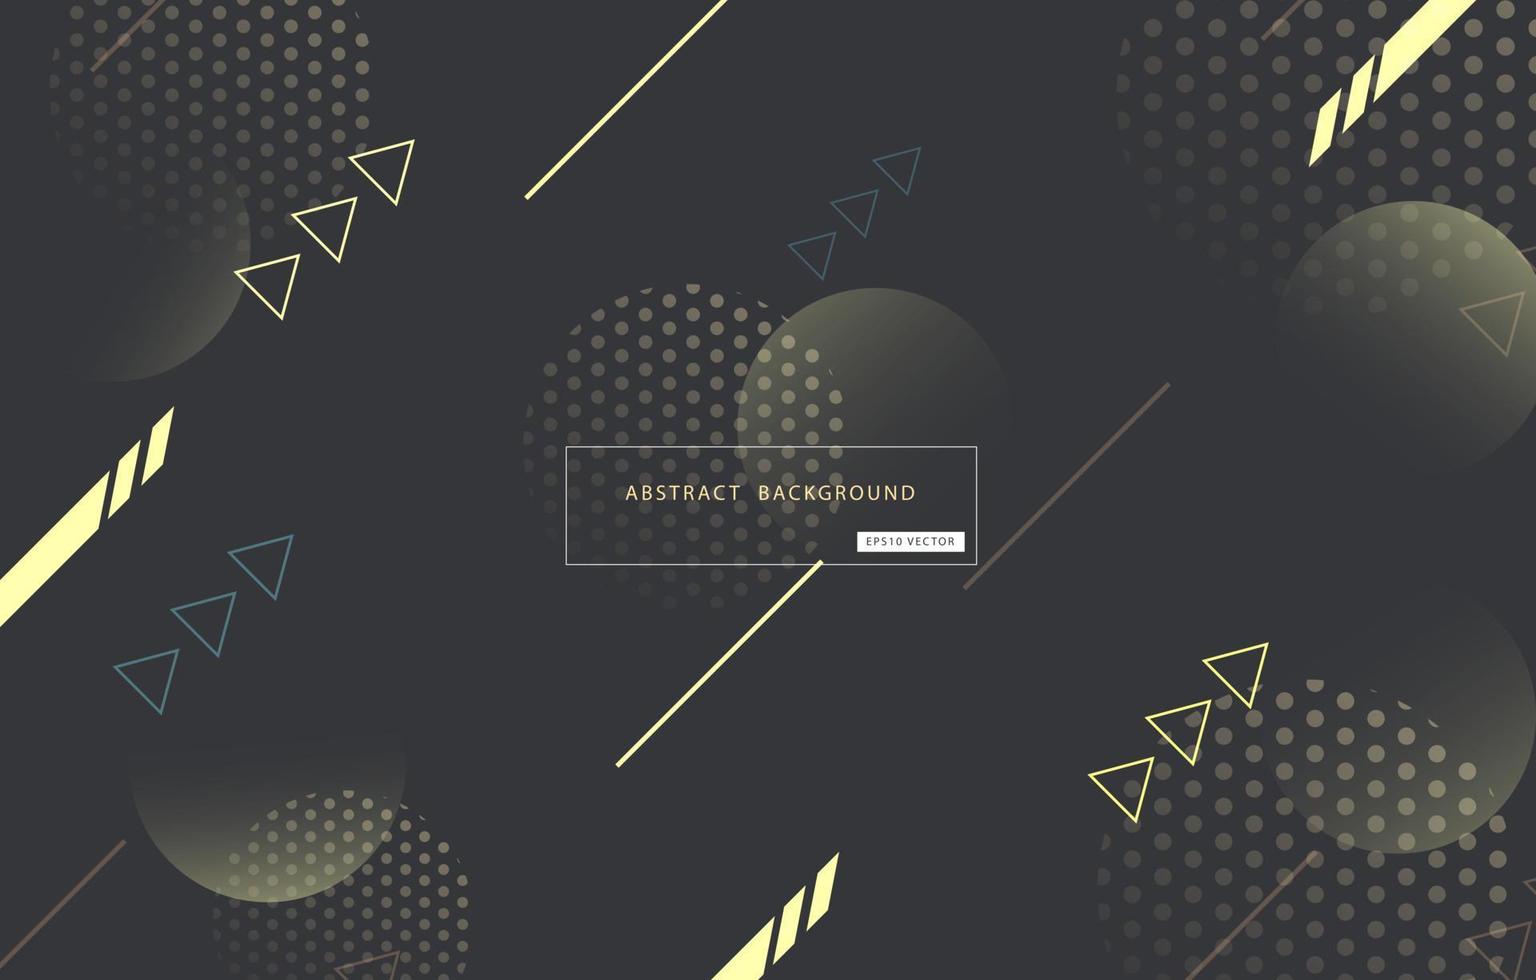 Abstract geometric background with arrow sign, modern pattern and elements design on dark gray background. Vector illustration